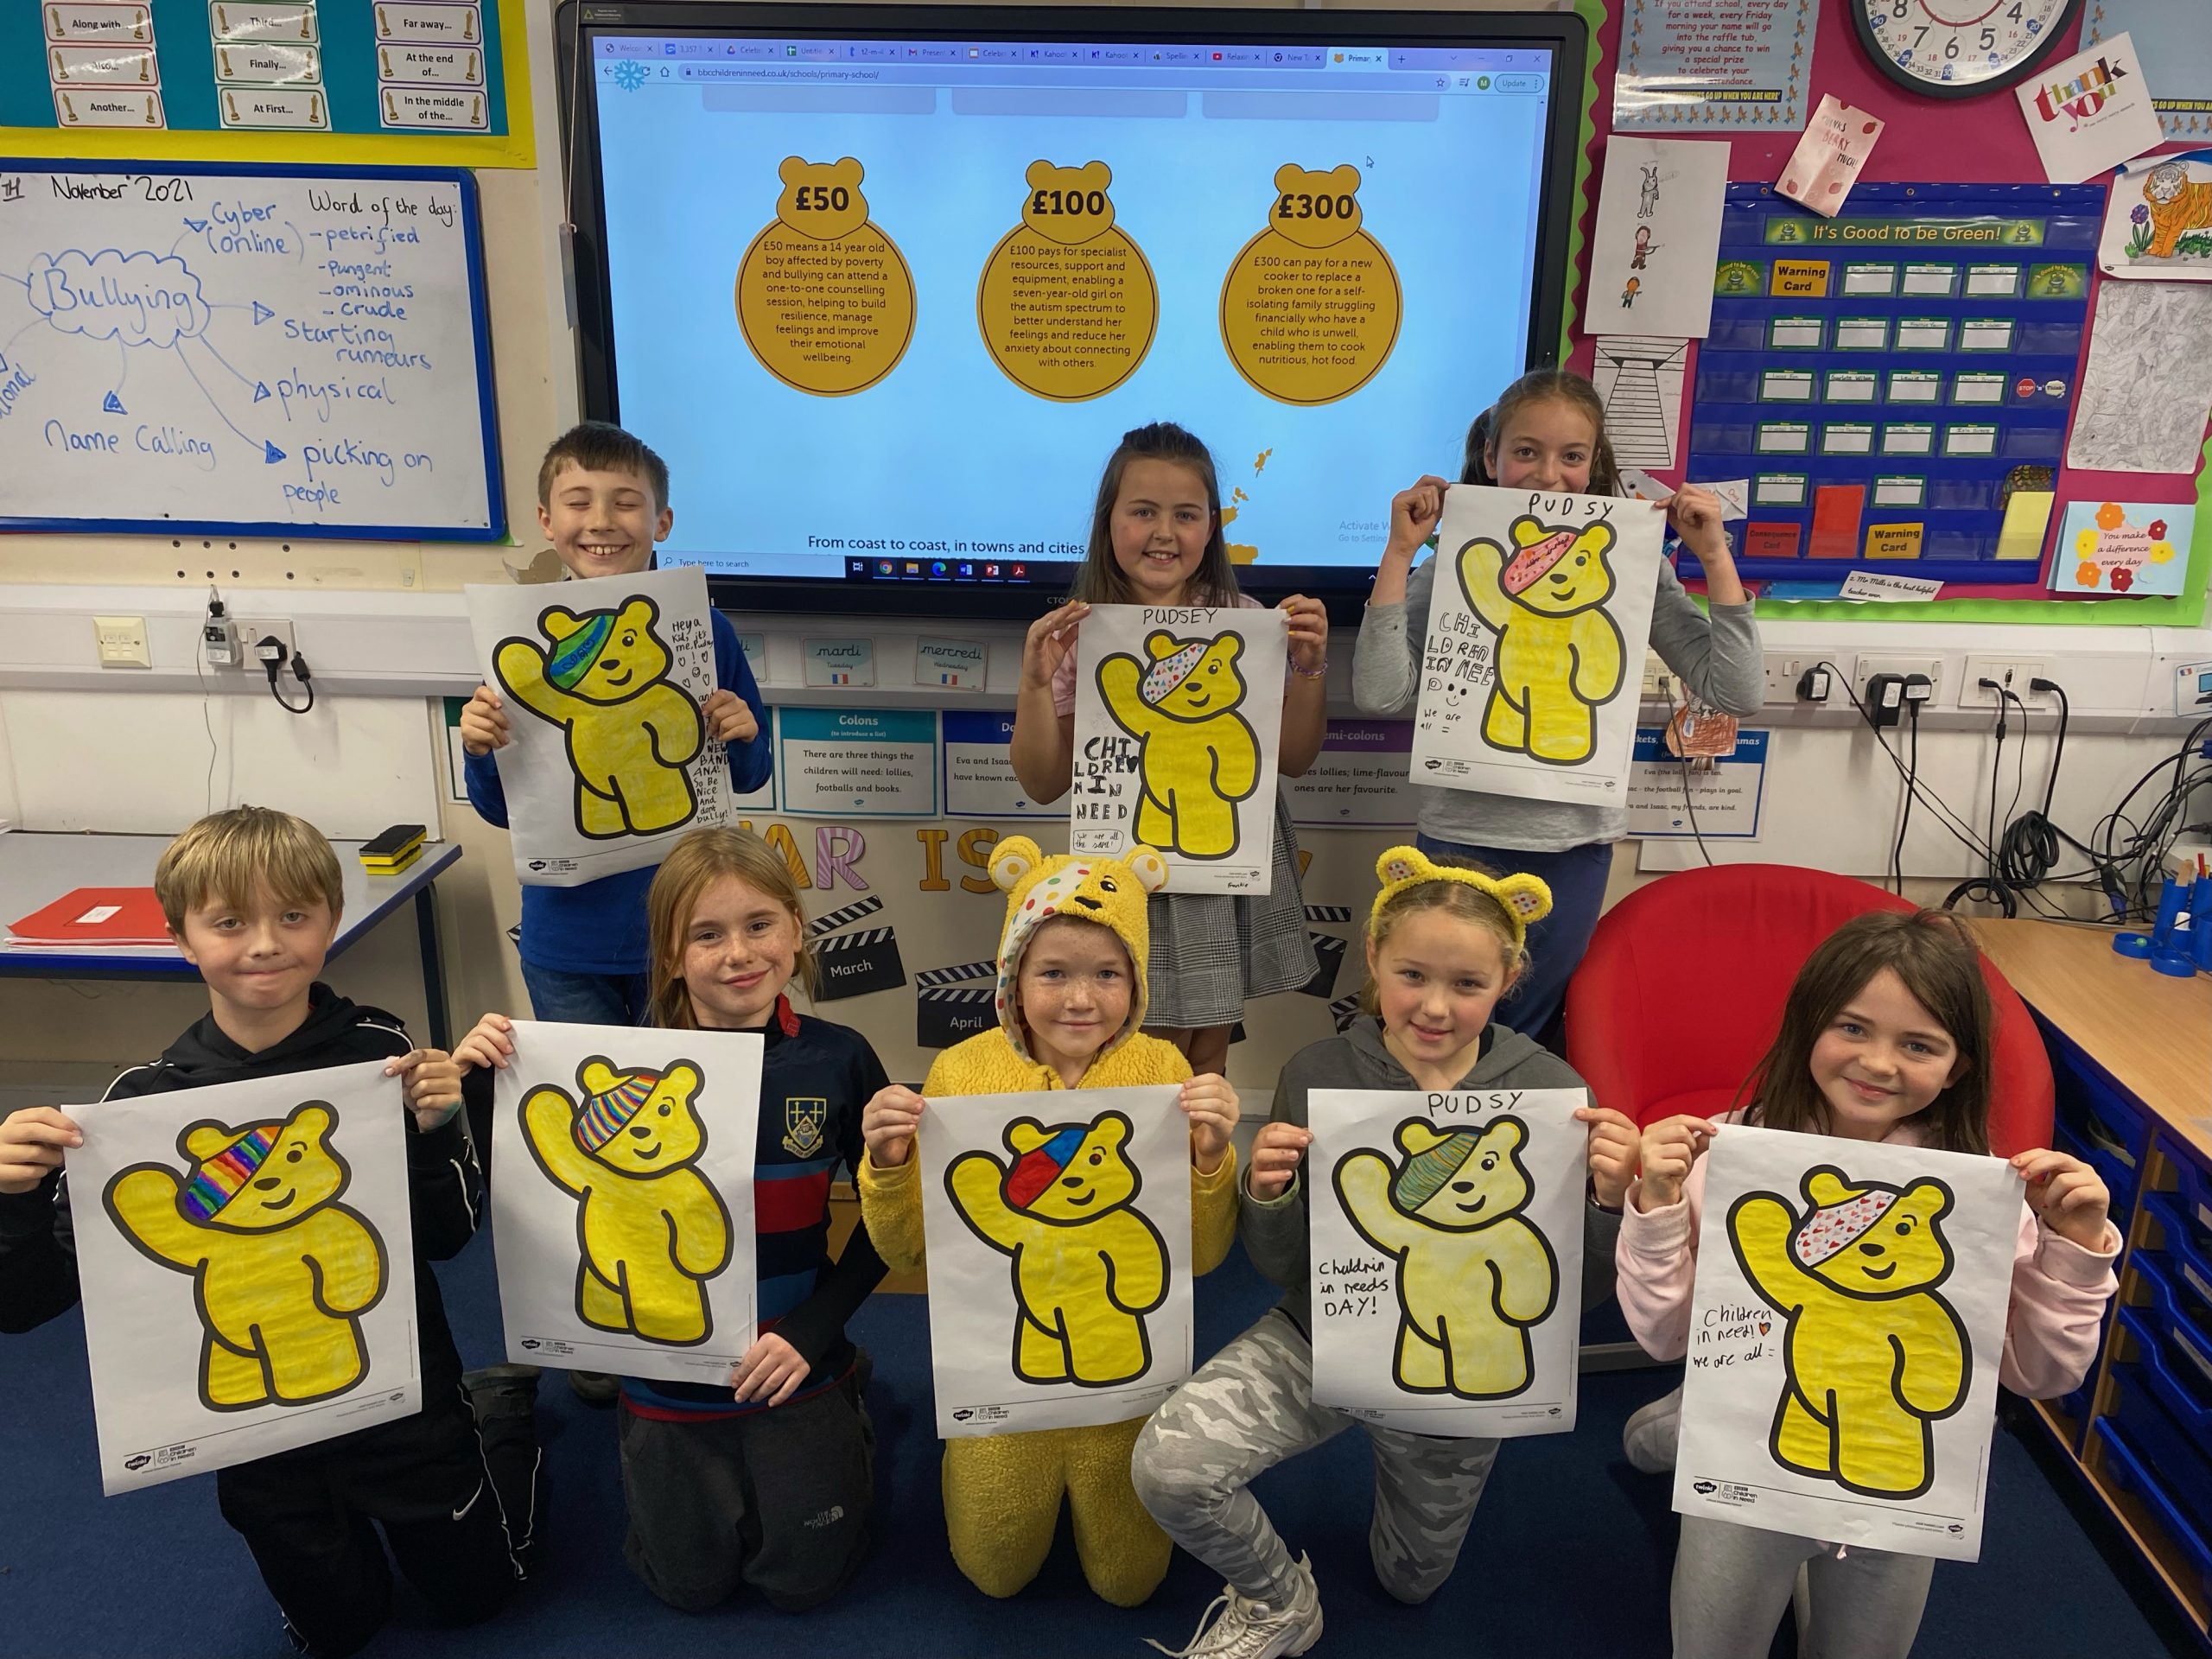 Year 5 Children In Need Pudsey drawings